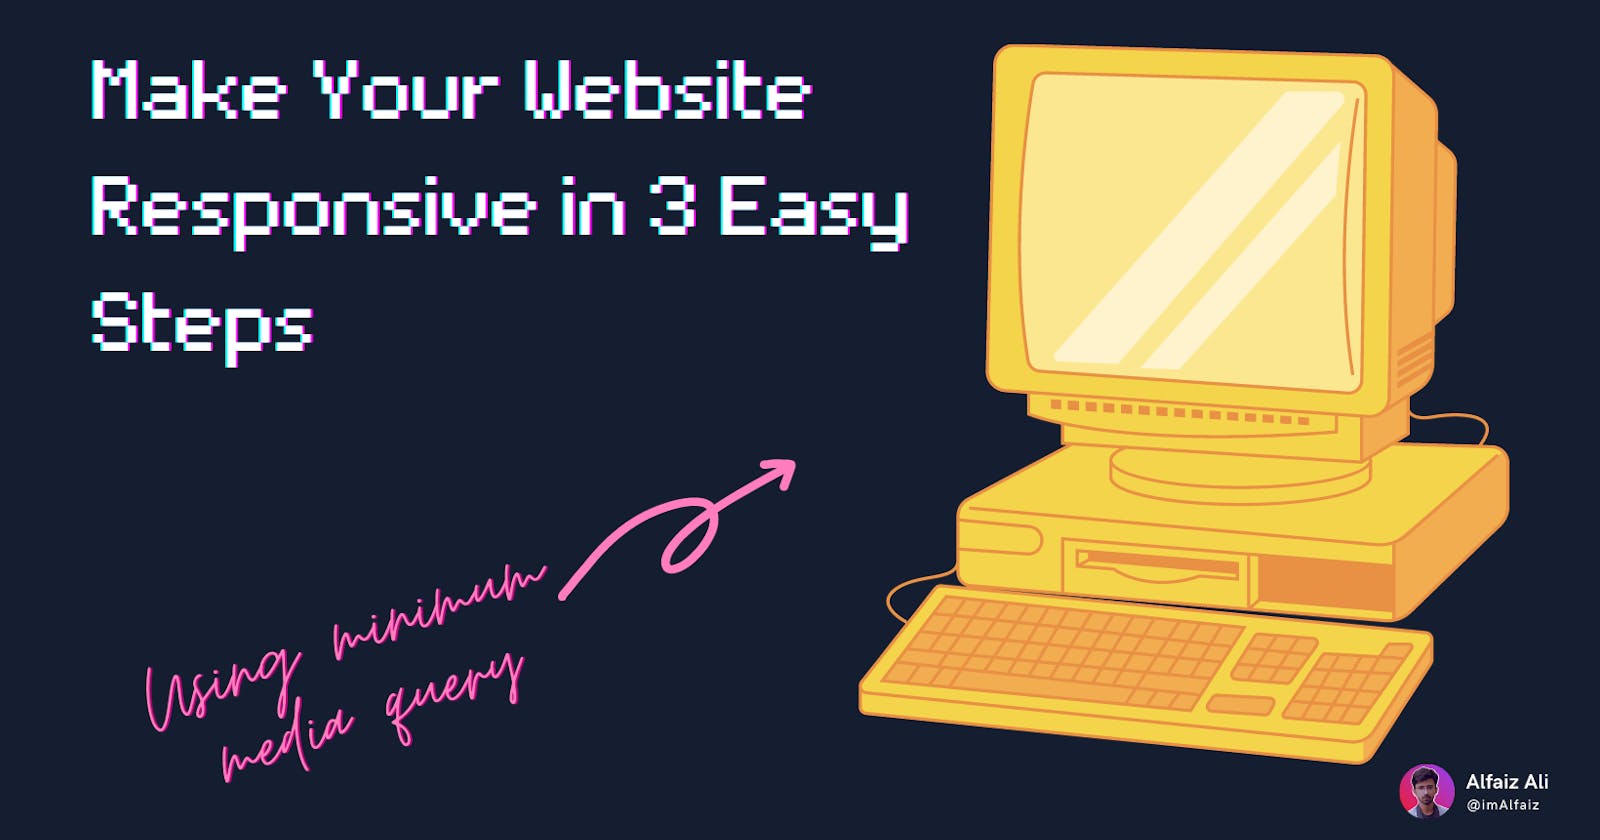 Make your website responsive in 3 easy steps